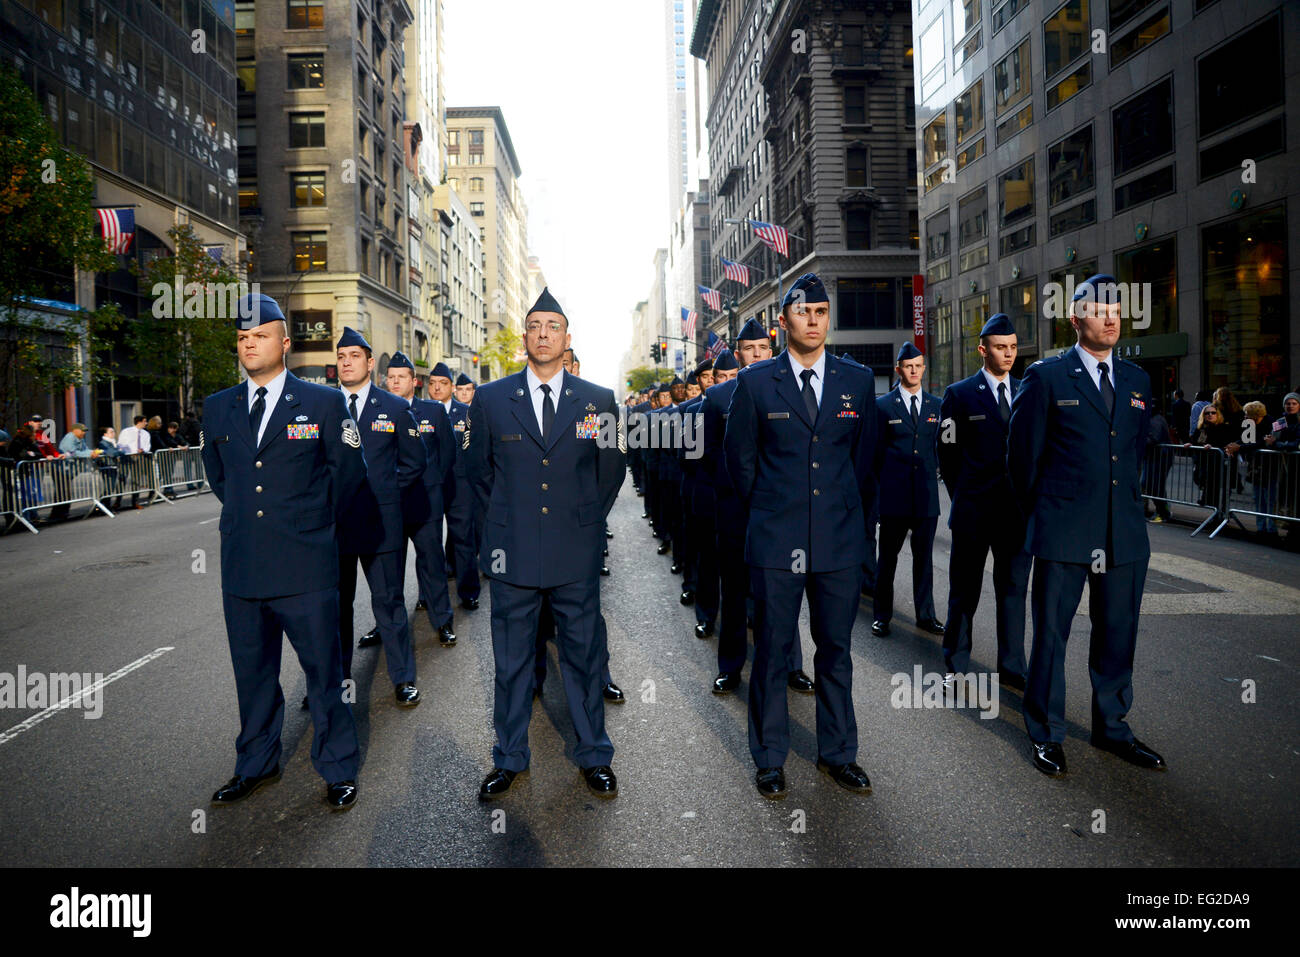 Airmen from Joint Base McGuire-Dix-Lakehurst, N.J., marched in a Veterans Day parade Nov. 11, 2014, in New York City, N.Y. The parade, organized in New York since 1929, has more than 25,000 participants and runs for approximately five hours.  Tech. Sgt. Carl Clegg Stock Photo